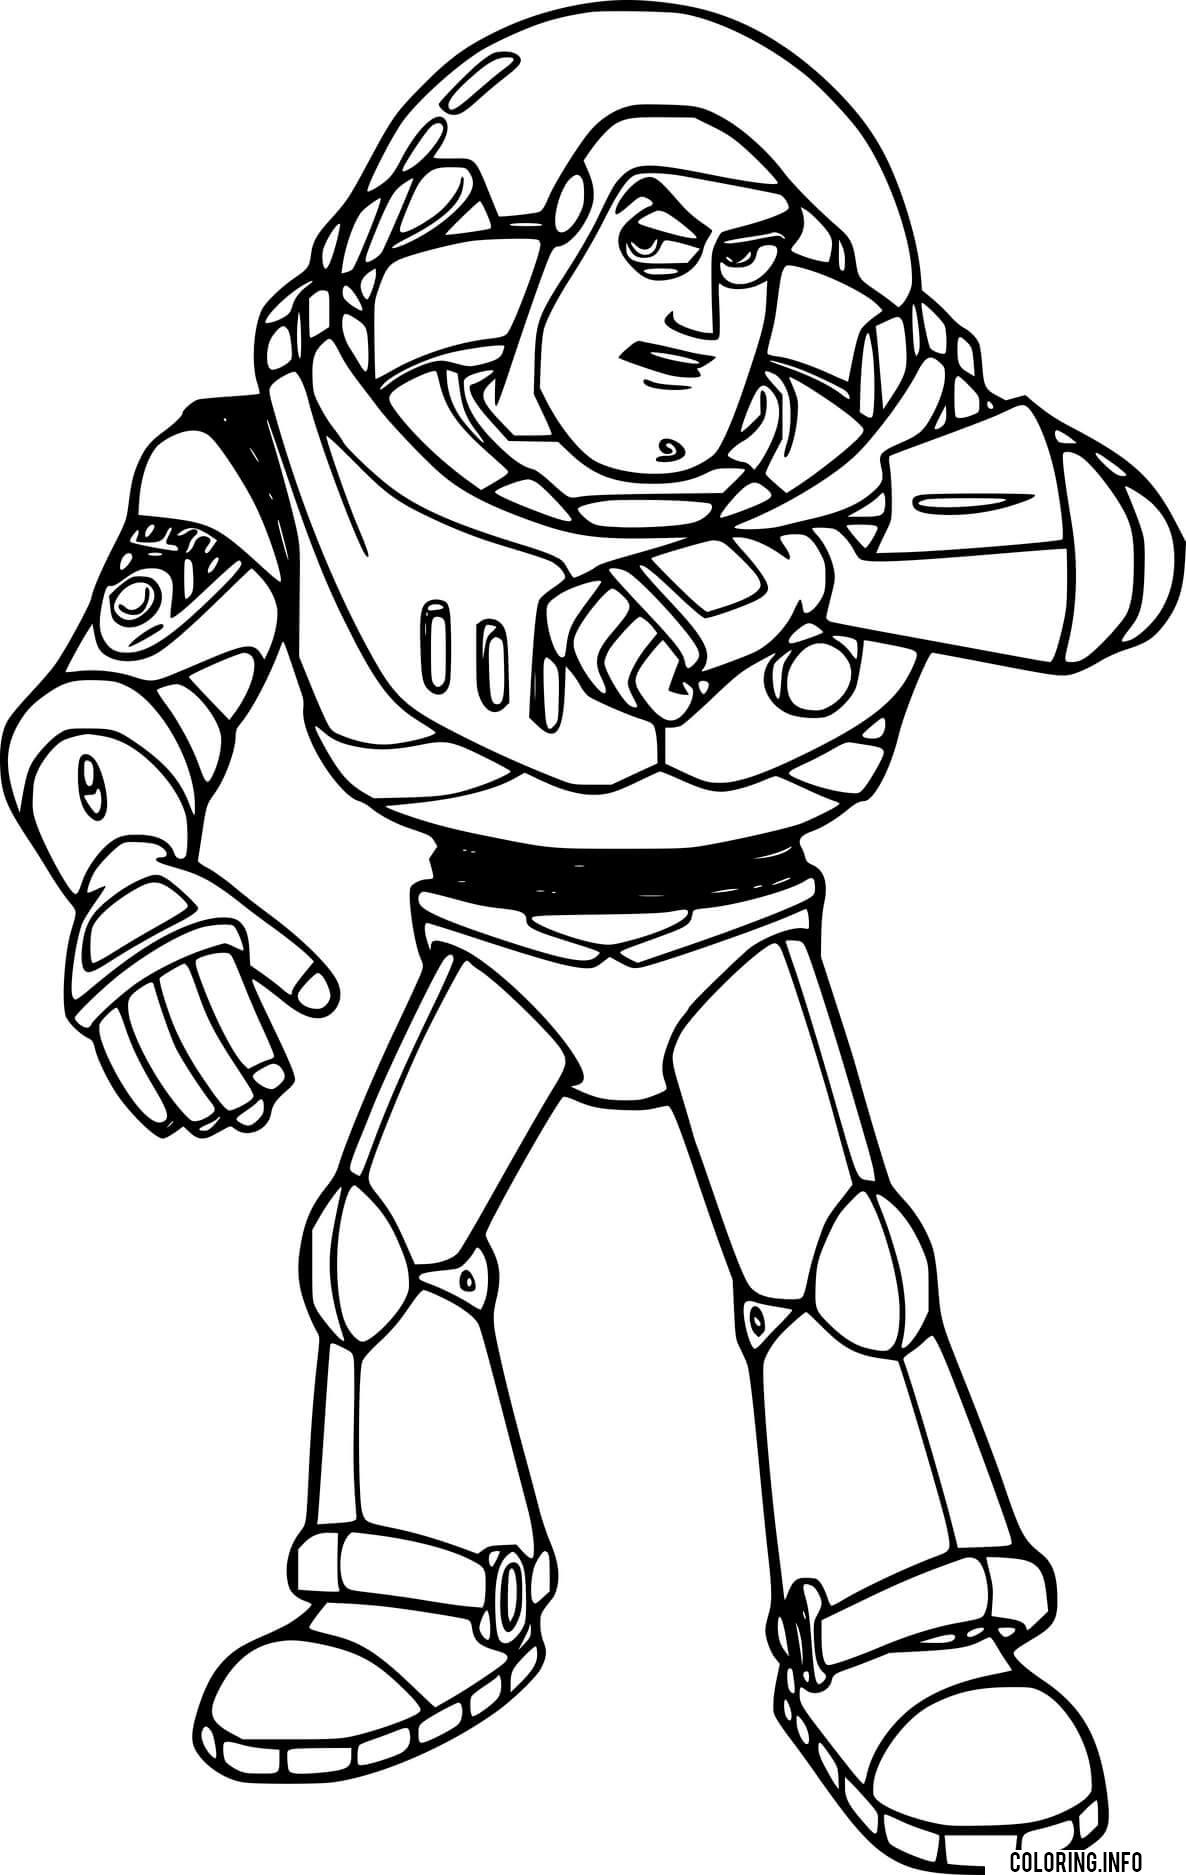 Buzz Lightyear Speaking coloring